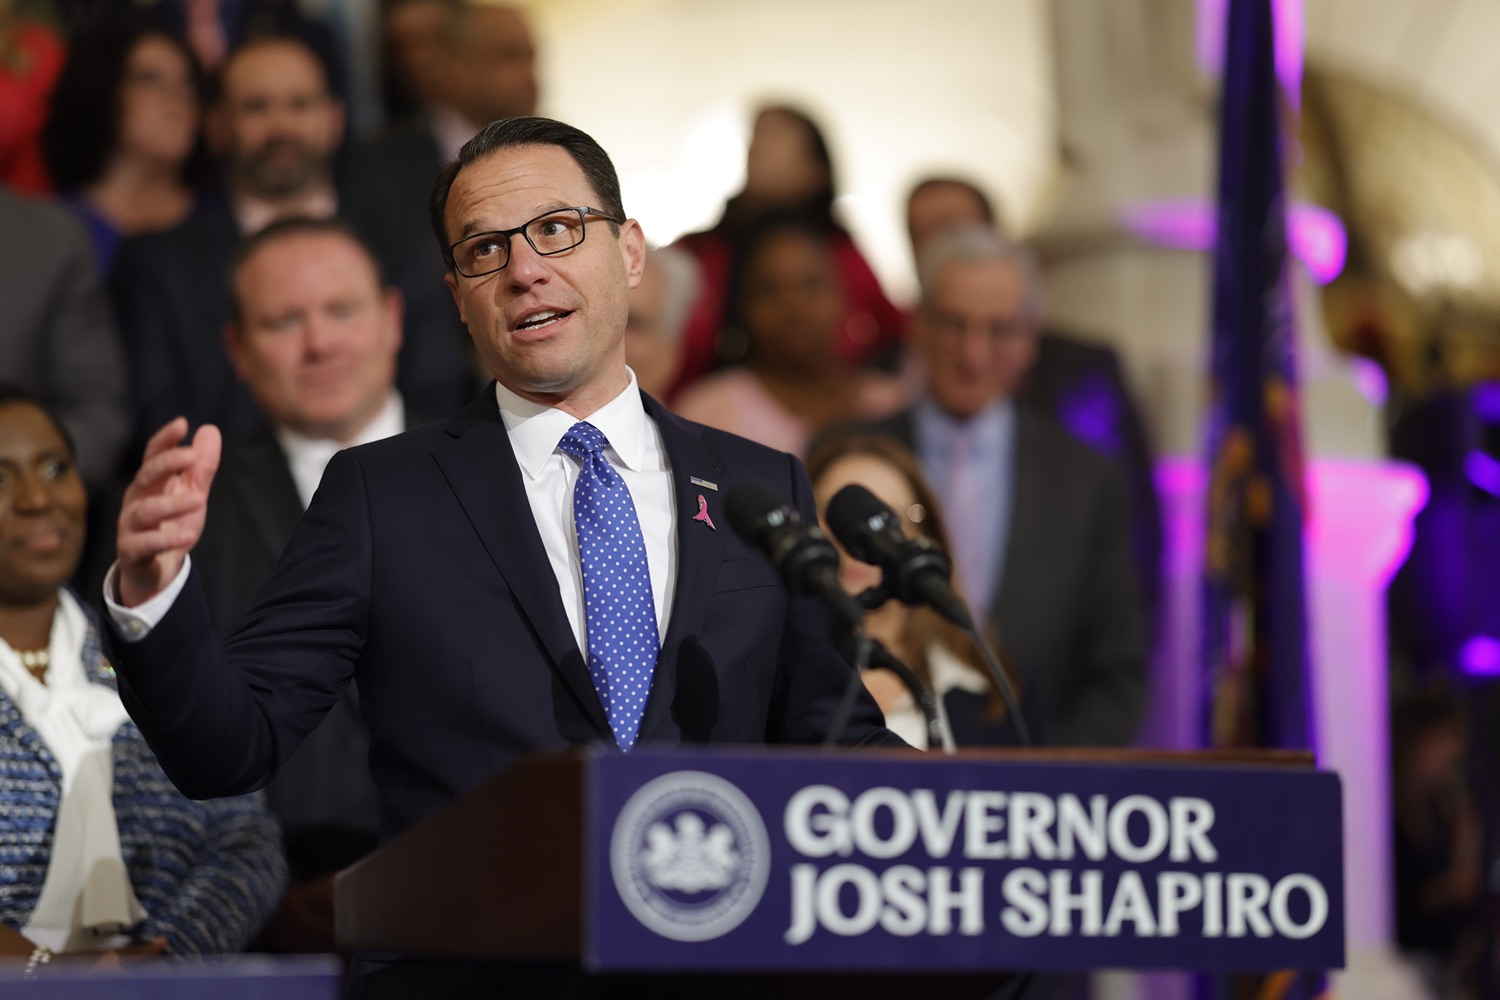 Governor Josh Shapiro signed the first bill of his Administration - Act 1 of 2023, a first-of-its-kind law in the nation that will require insurers to cover preventive breast and ovarian cancer screenings for high-risk women at no cost. MAY 01, 2023 - HARRISBURG, PA<br><a href="https://filesource.amperwave.net/commonwealthofpa/photo/23041_gov_sb8_dz_020.JPG" target="_blank">⇣ Download Photo</a>